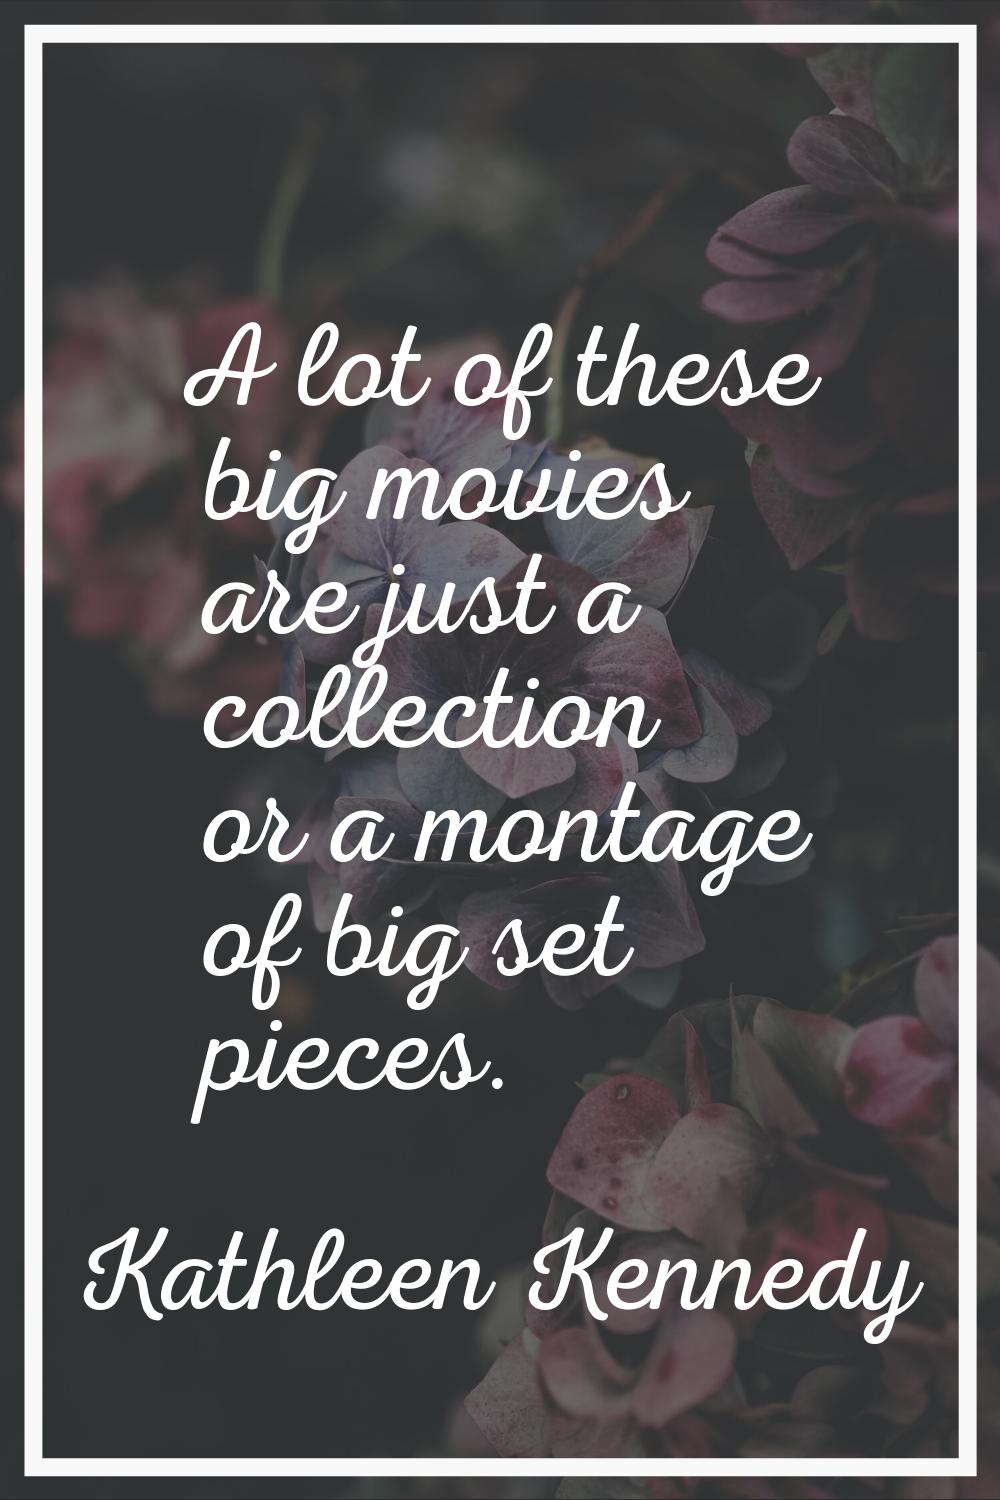 A lot of these big movies are just a collection or a montage of big set pieces.